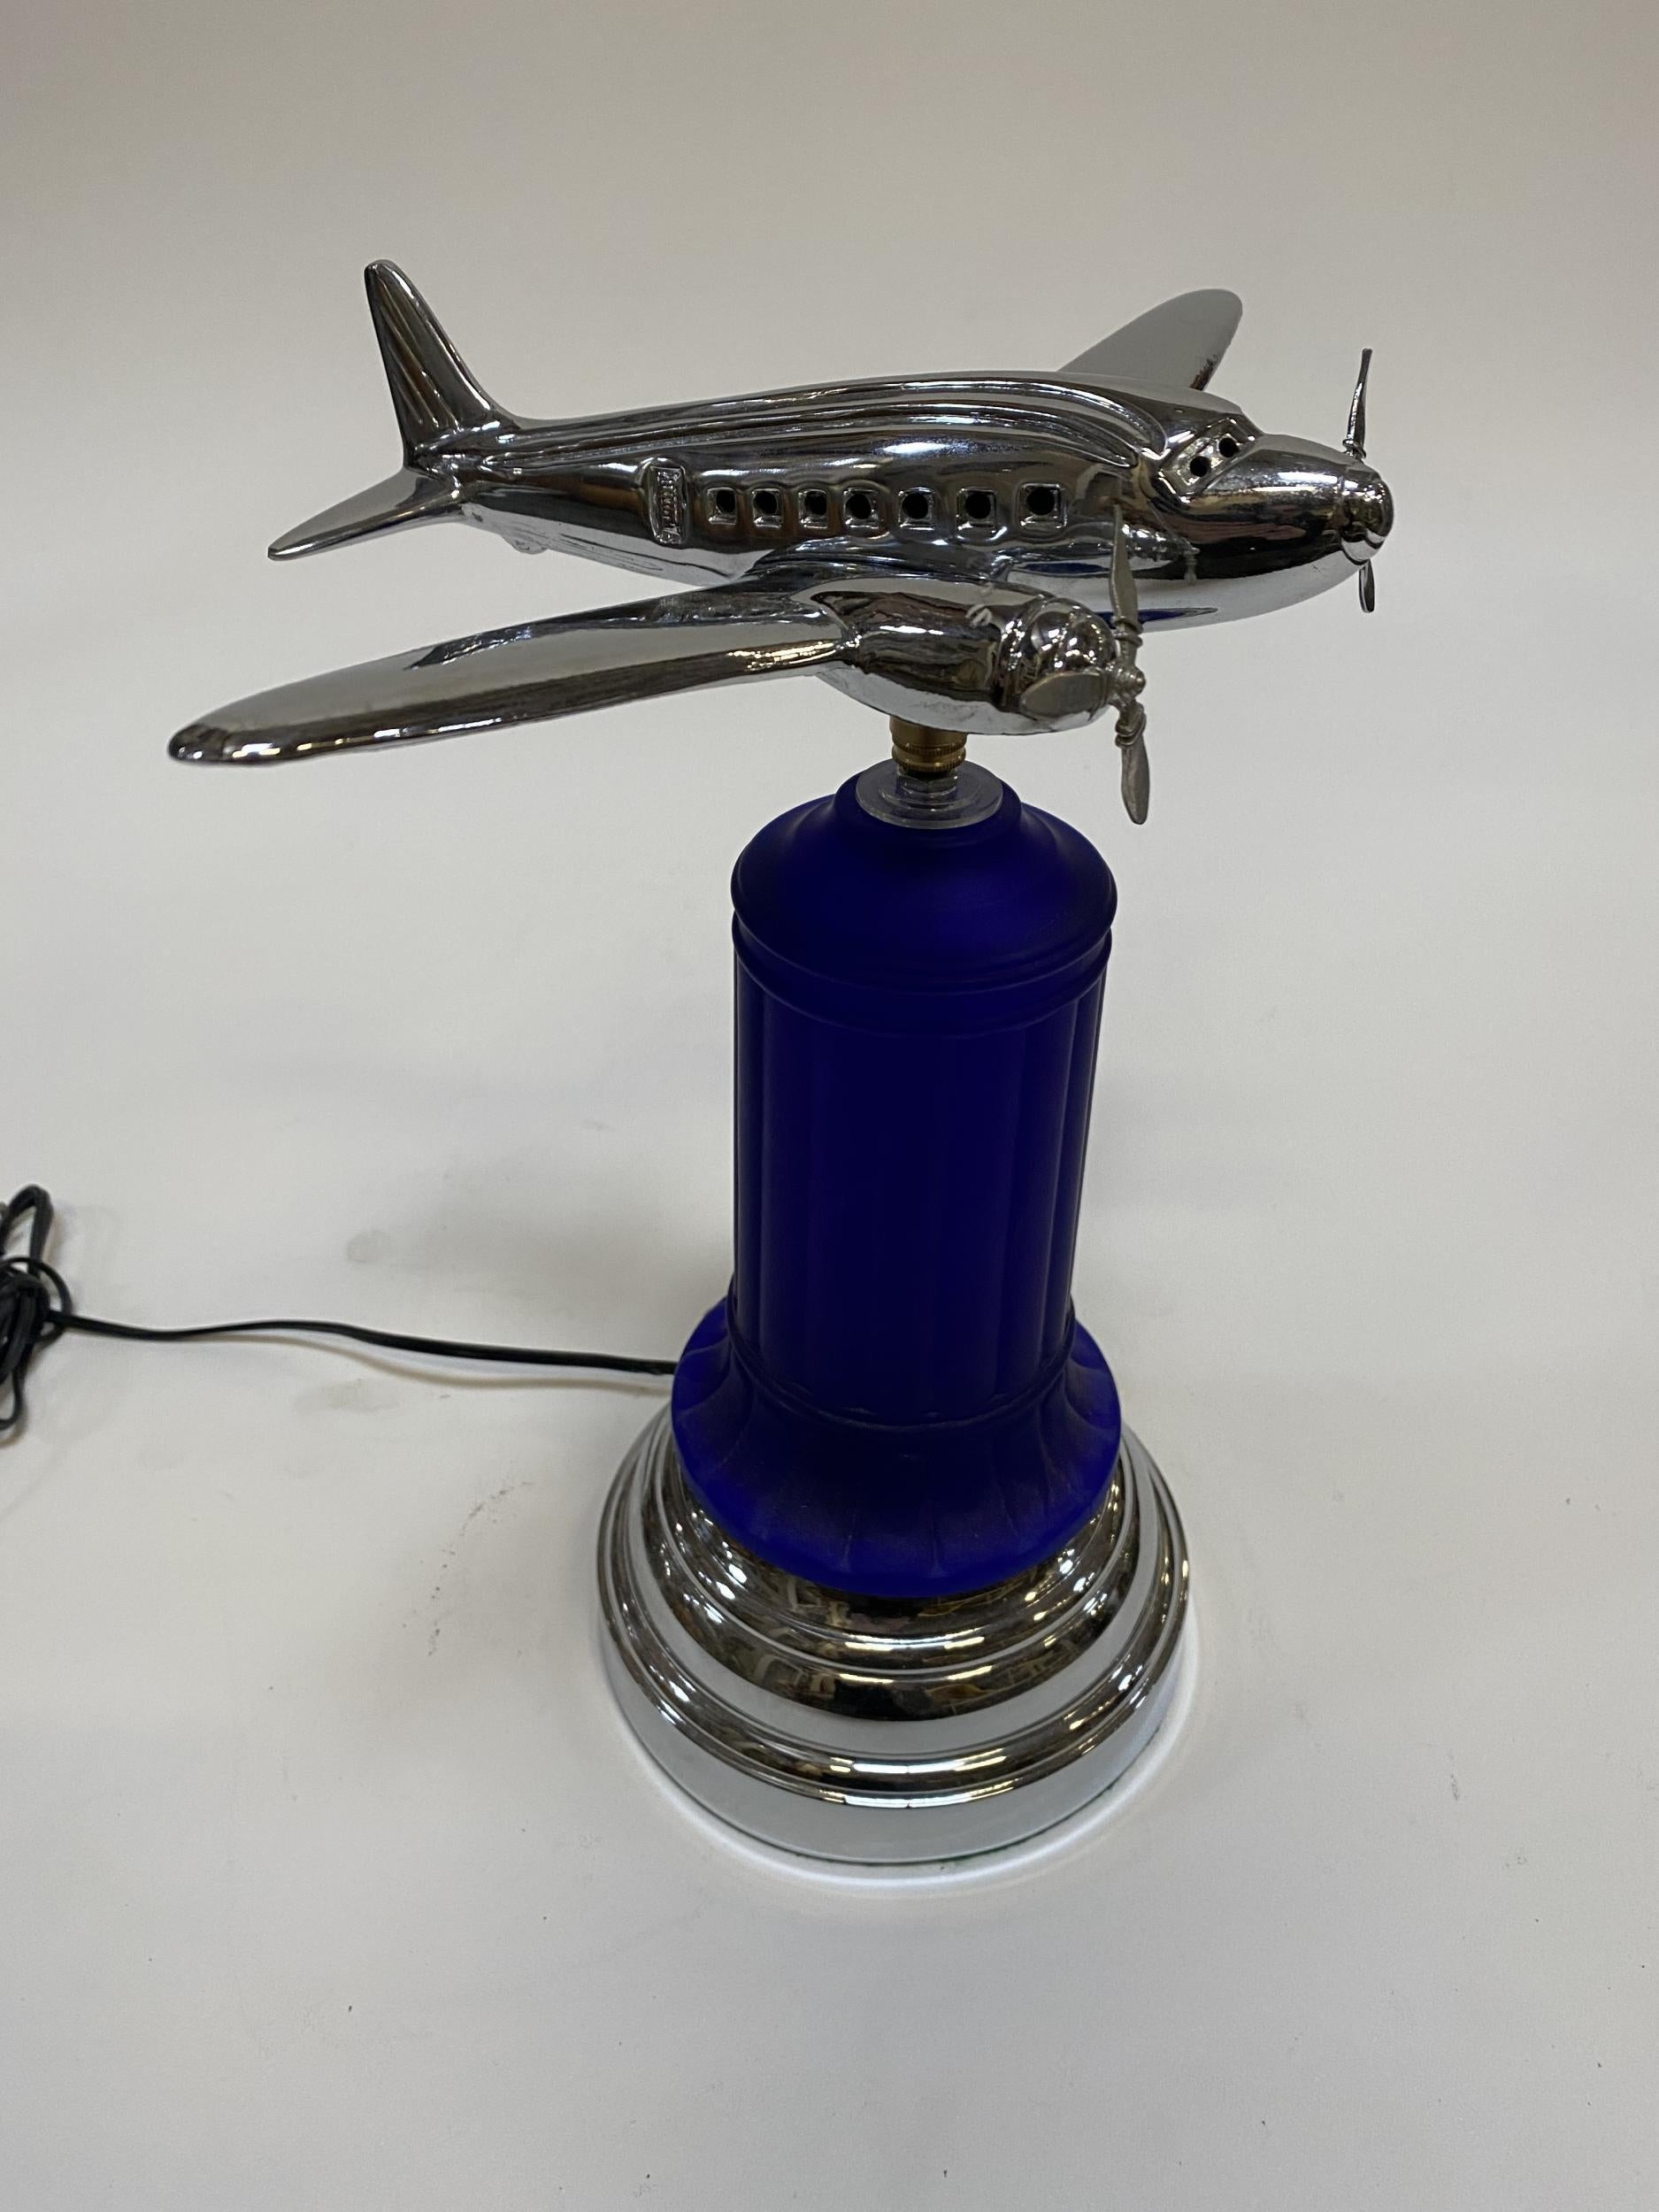 This custom chrome airplane accent lamp was created in Los Angeles in the 1980s using a re-edition 1930s cobalt glass table lamp. This 1930's inspired lamp features a cobalt glass light up center with an added chrome base and light up airplane model